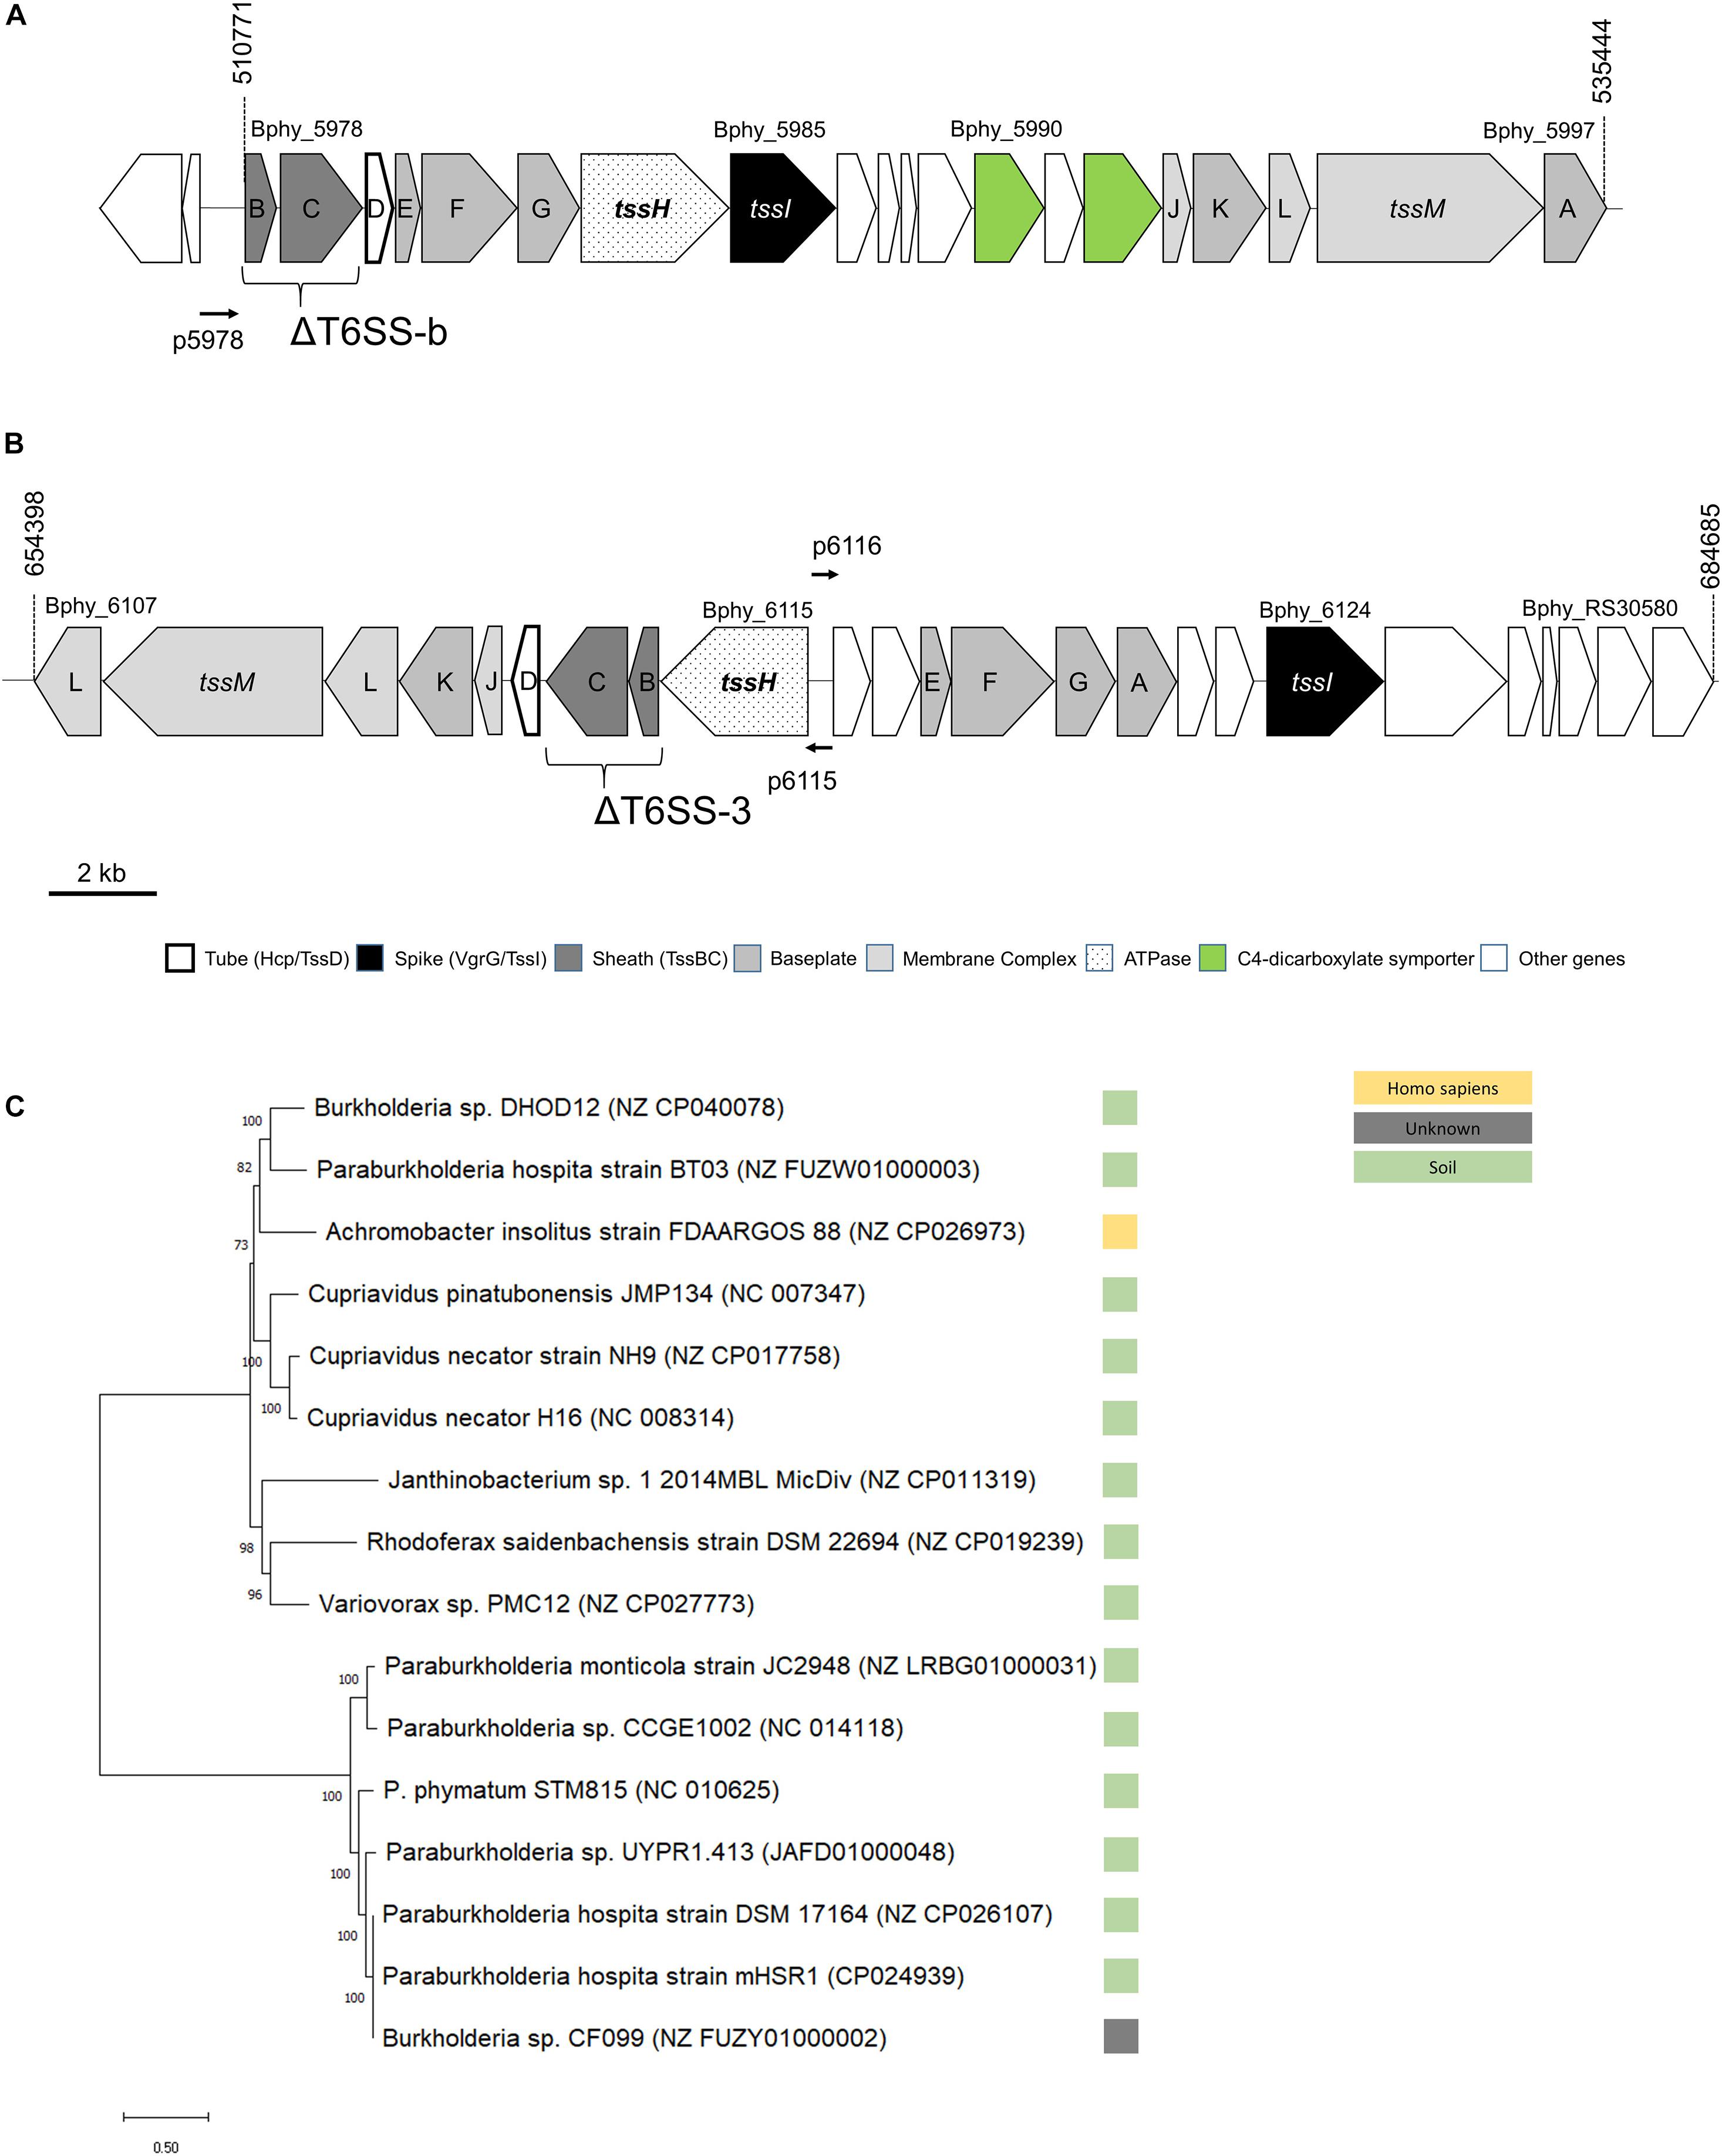 Frontiers Differential Expression Of Paraburkholderia Phymatum Type Vi Secretion Systems T6ss Suggests A Role Of T6ss B In Early Symbiotic Interaction Plant Science